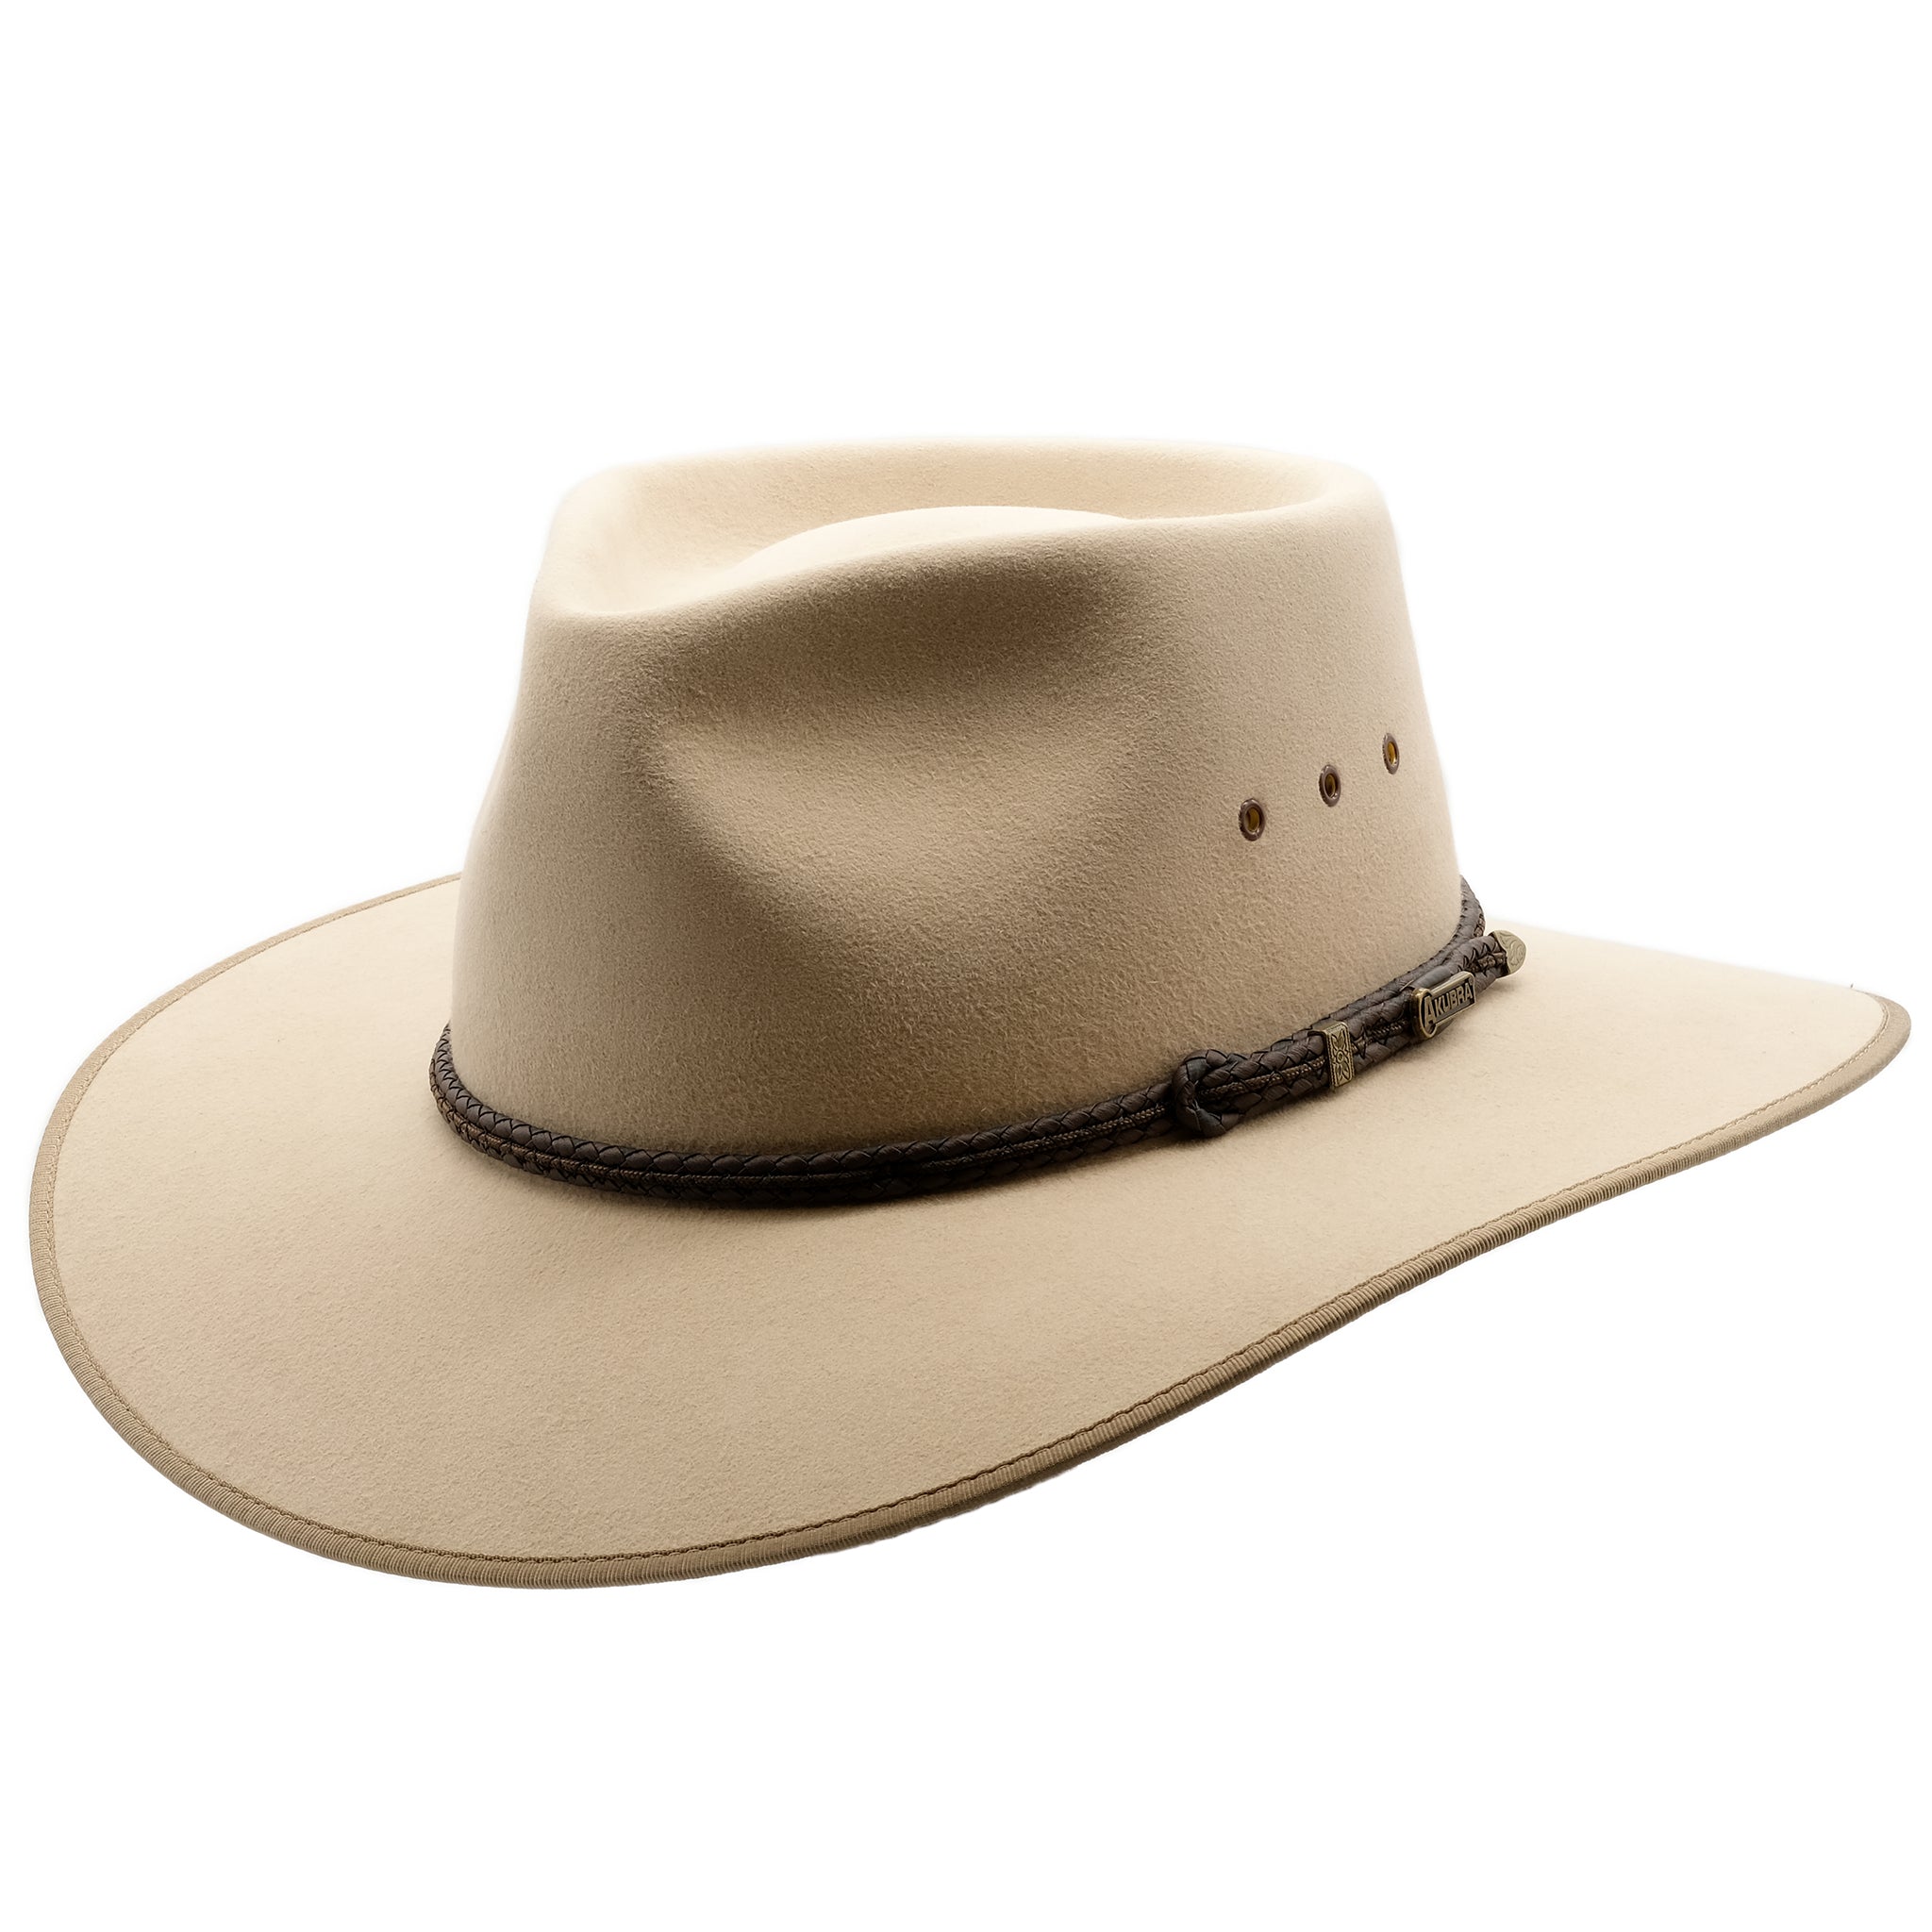 Angle view of the Akubra Cattleman hat in sand colour